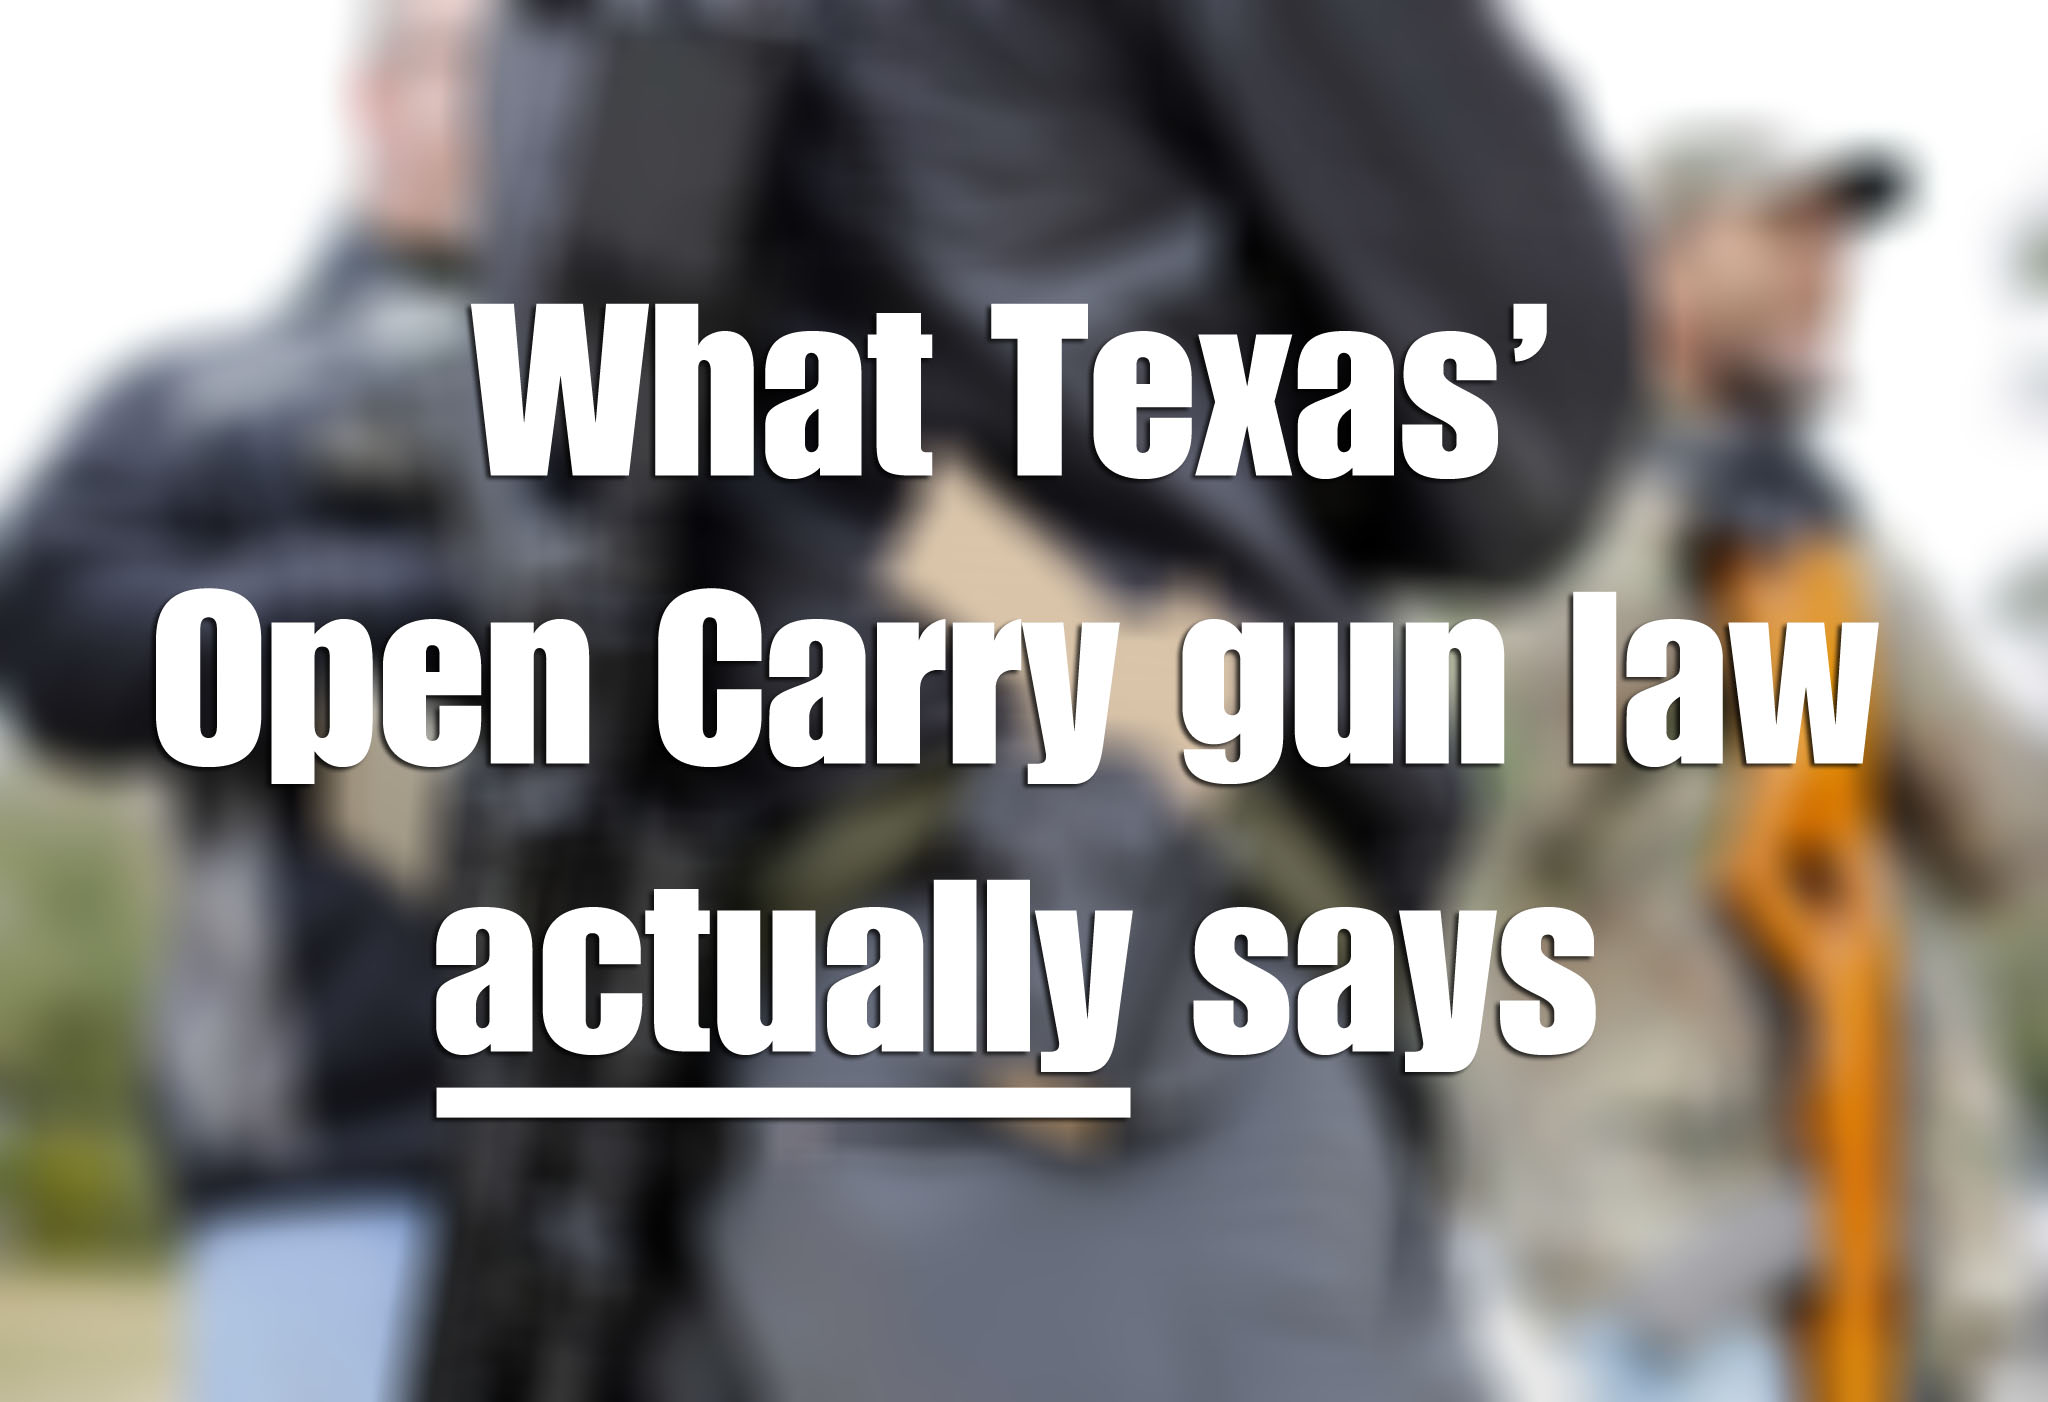 What state laws pertain to Open Carry?